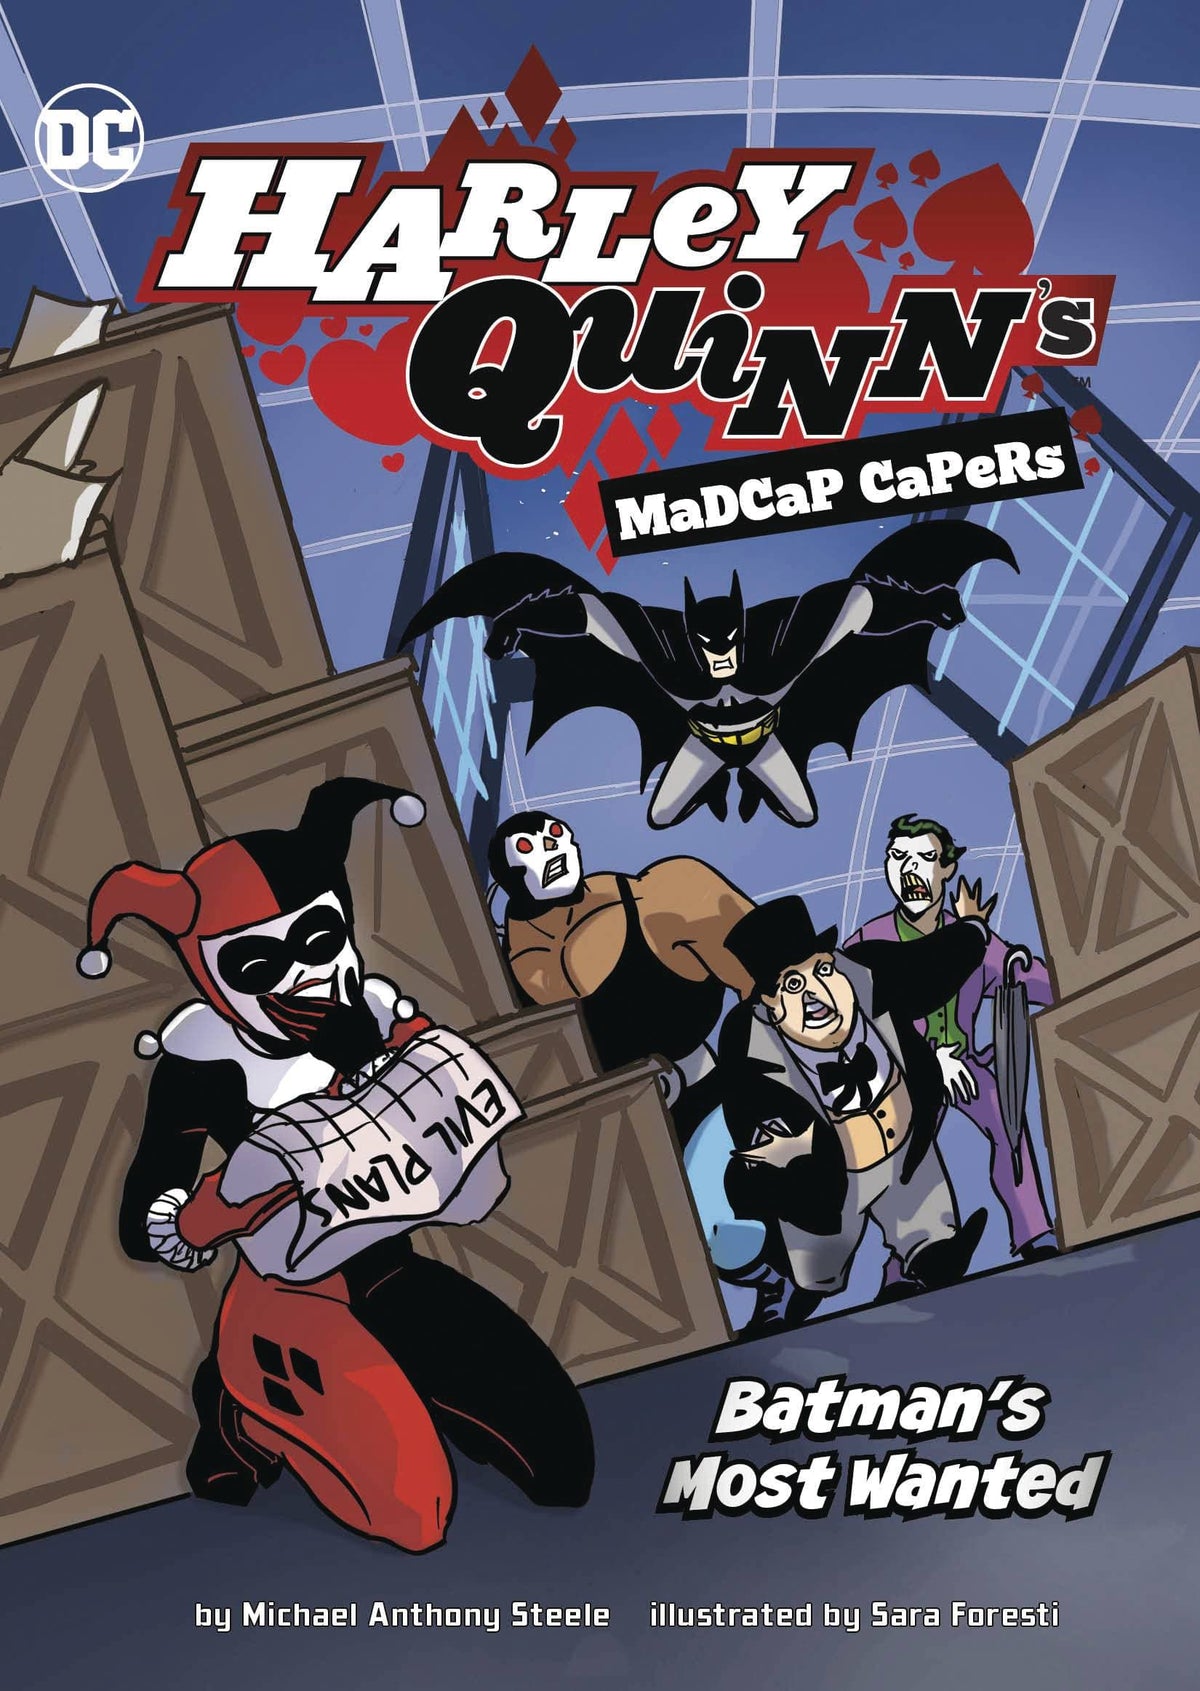 HARLEY QUINN MADCAP CAPERS BATMANS MOST WANTED - Third Eye